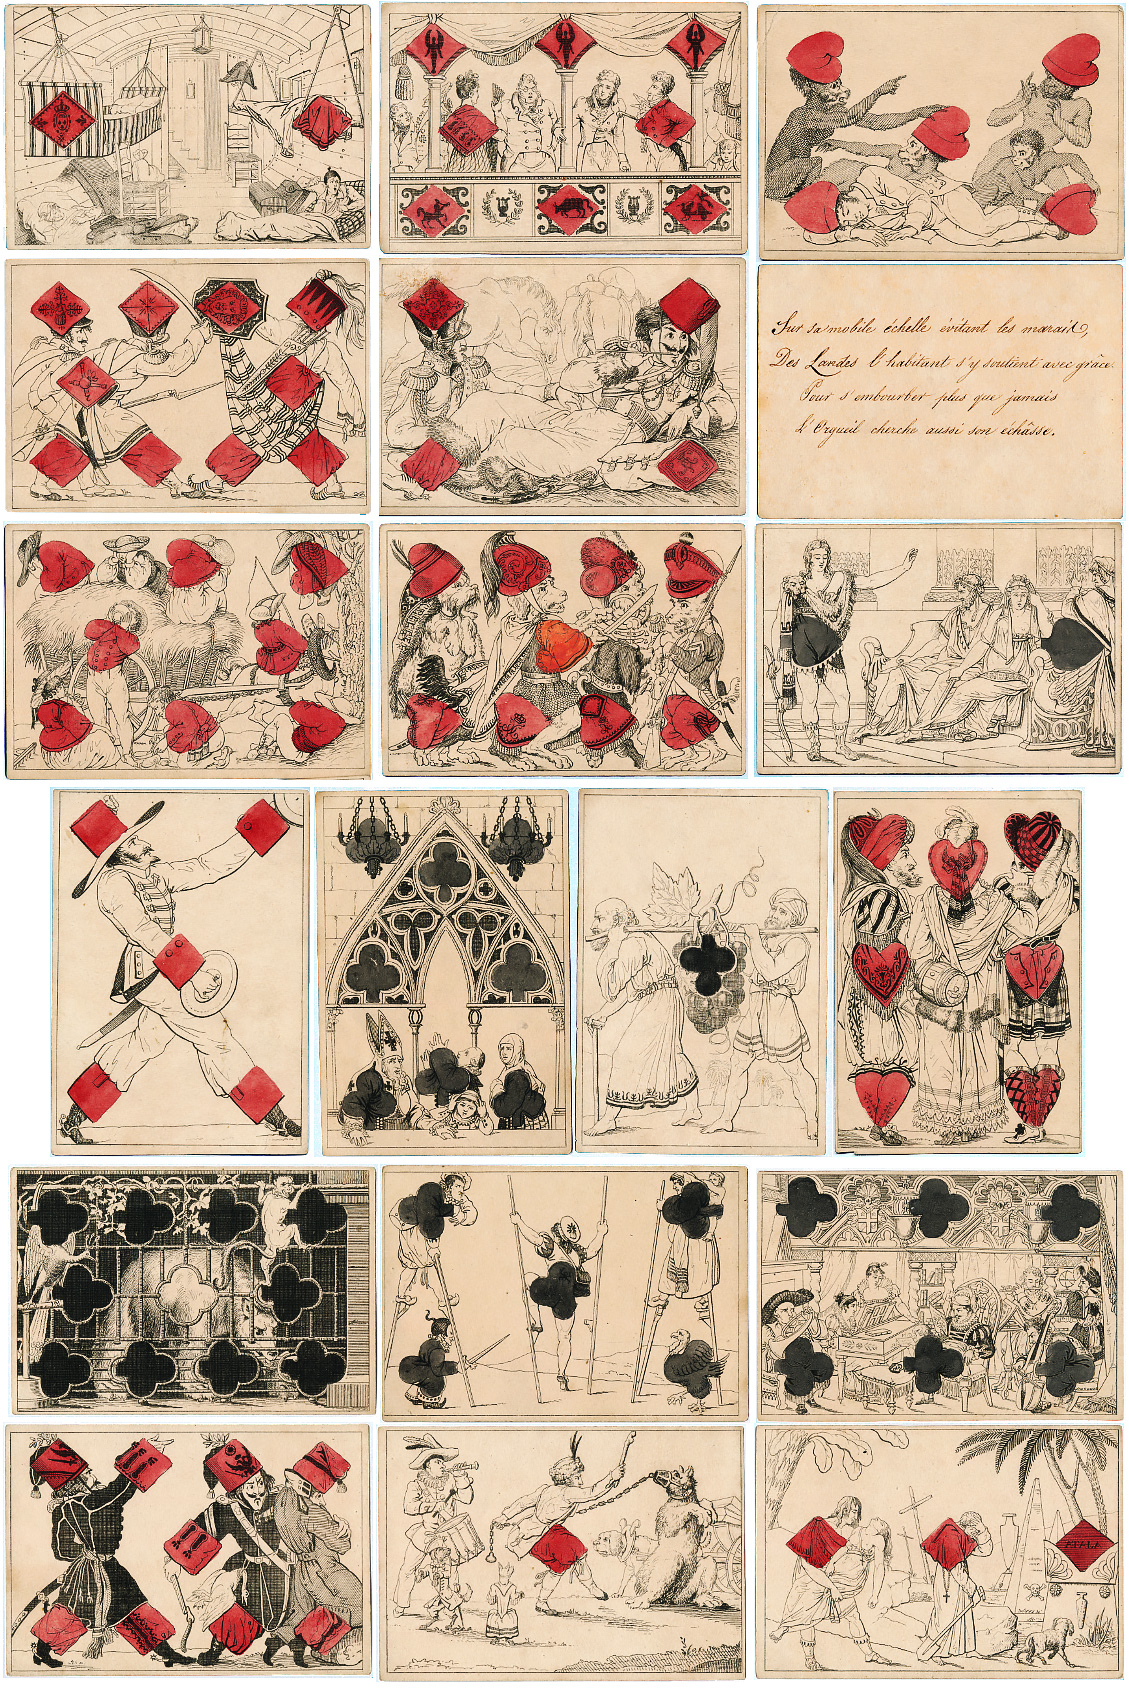 Complete deck of 1817 Baron Louis Atthalin’s Transformation playing cards